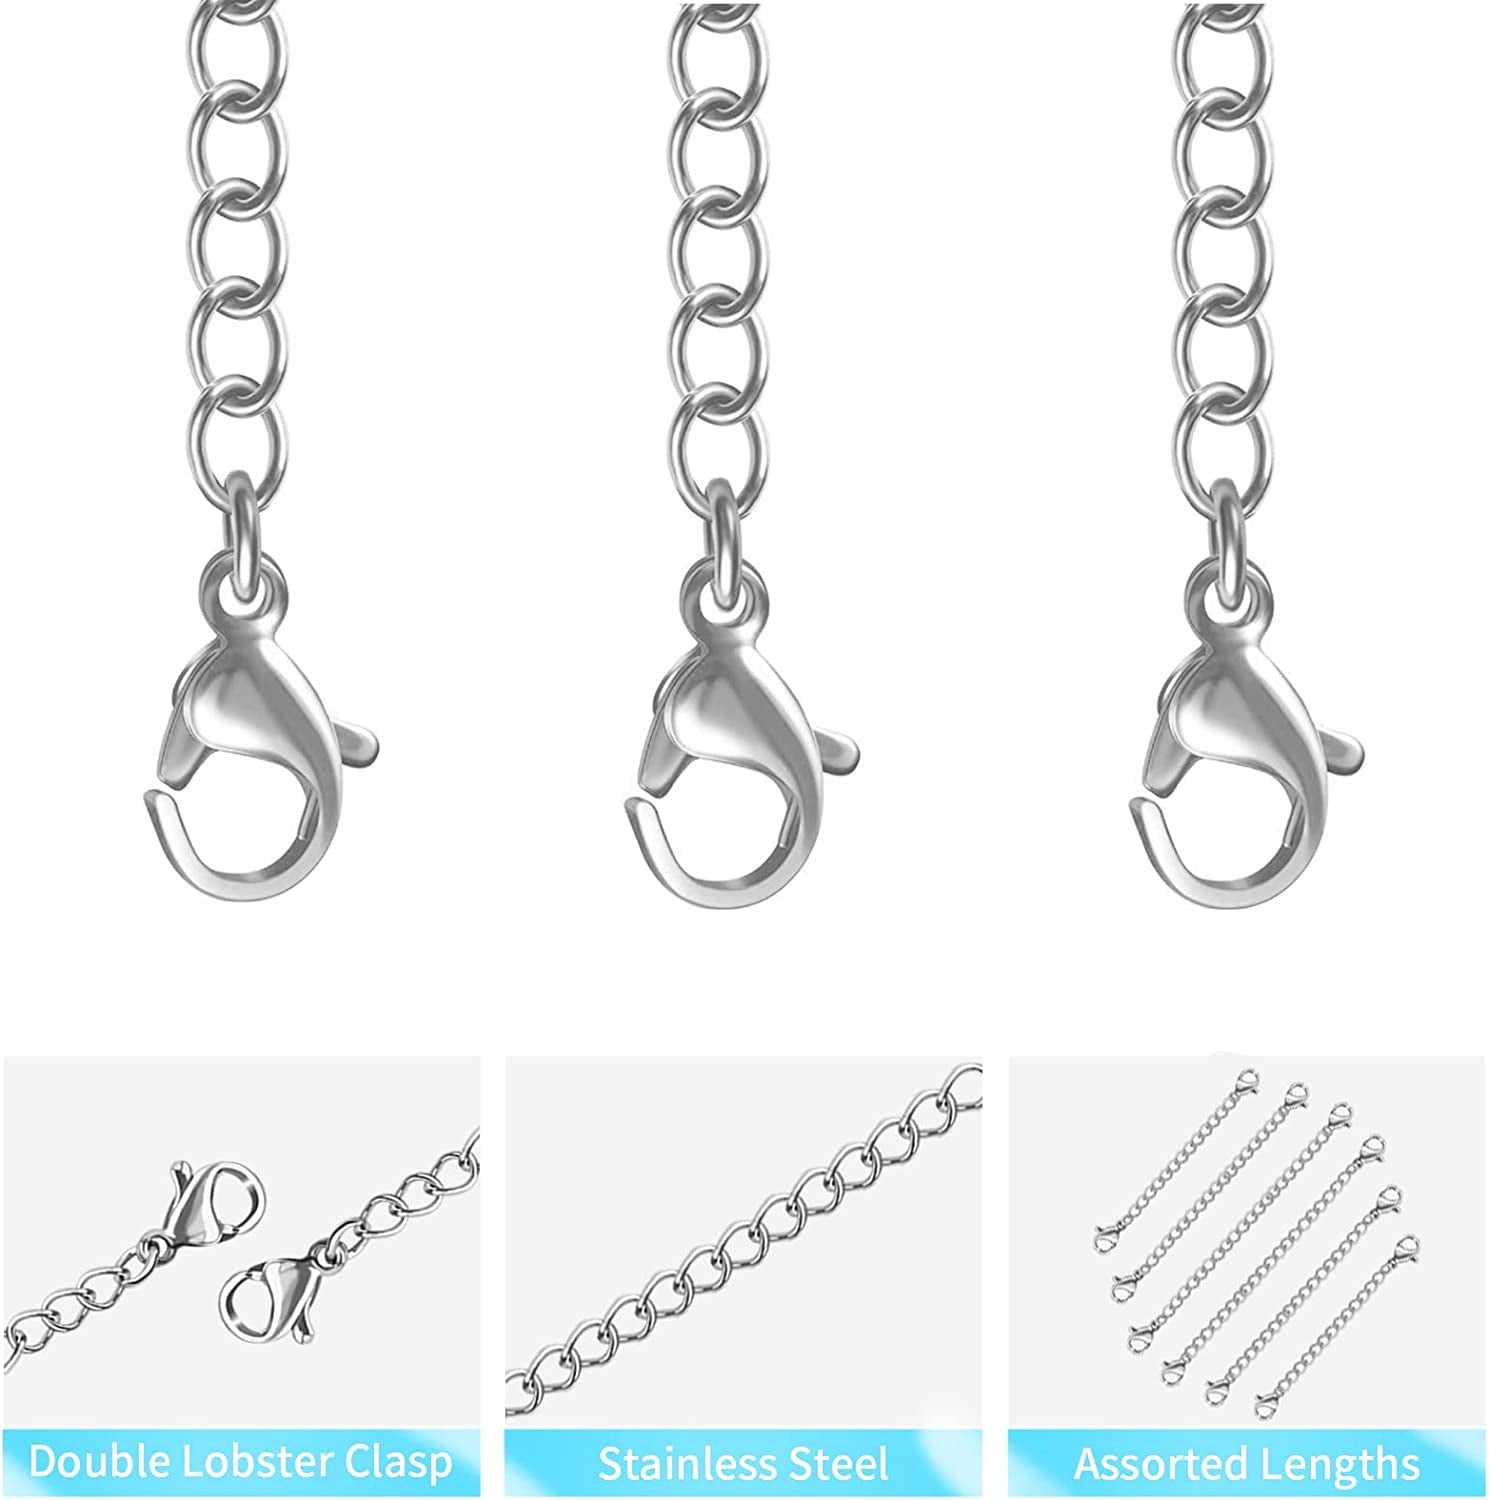  SEWACC 100 Pcs Necklace Extender Anklet Extension Chains  Necklace Chain Extender Chain Extenders for Necklaces DIY Bracelet Chains  Lobster Clasp Chain Stainless Steel The Chain Component : Arts, Crafts &  Sewing